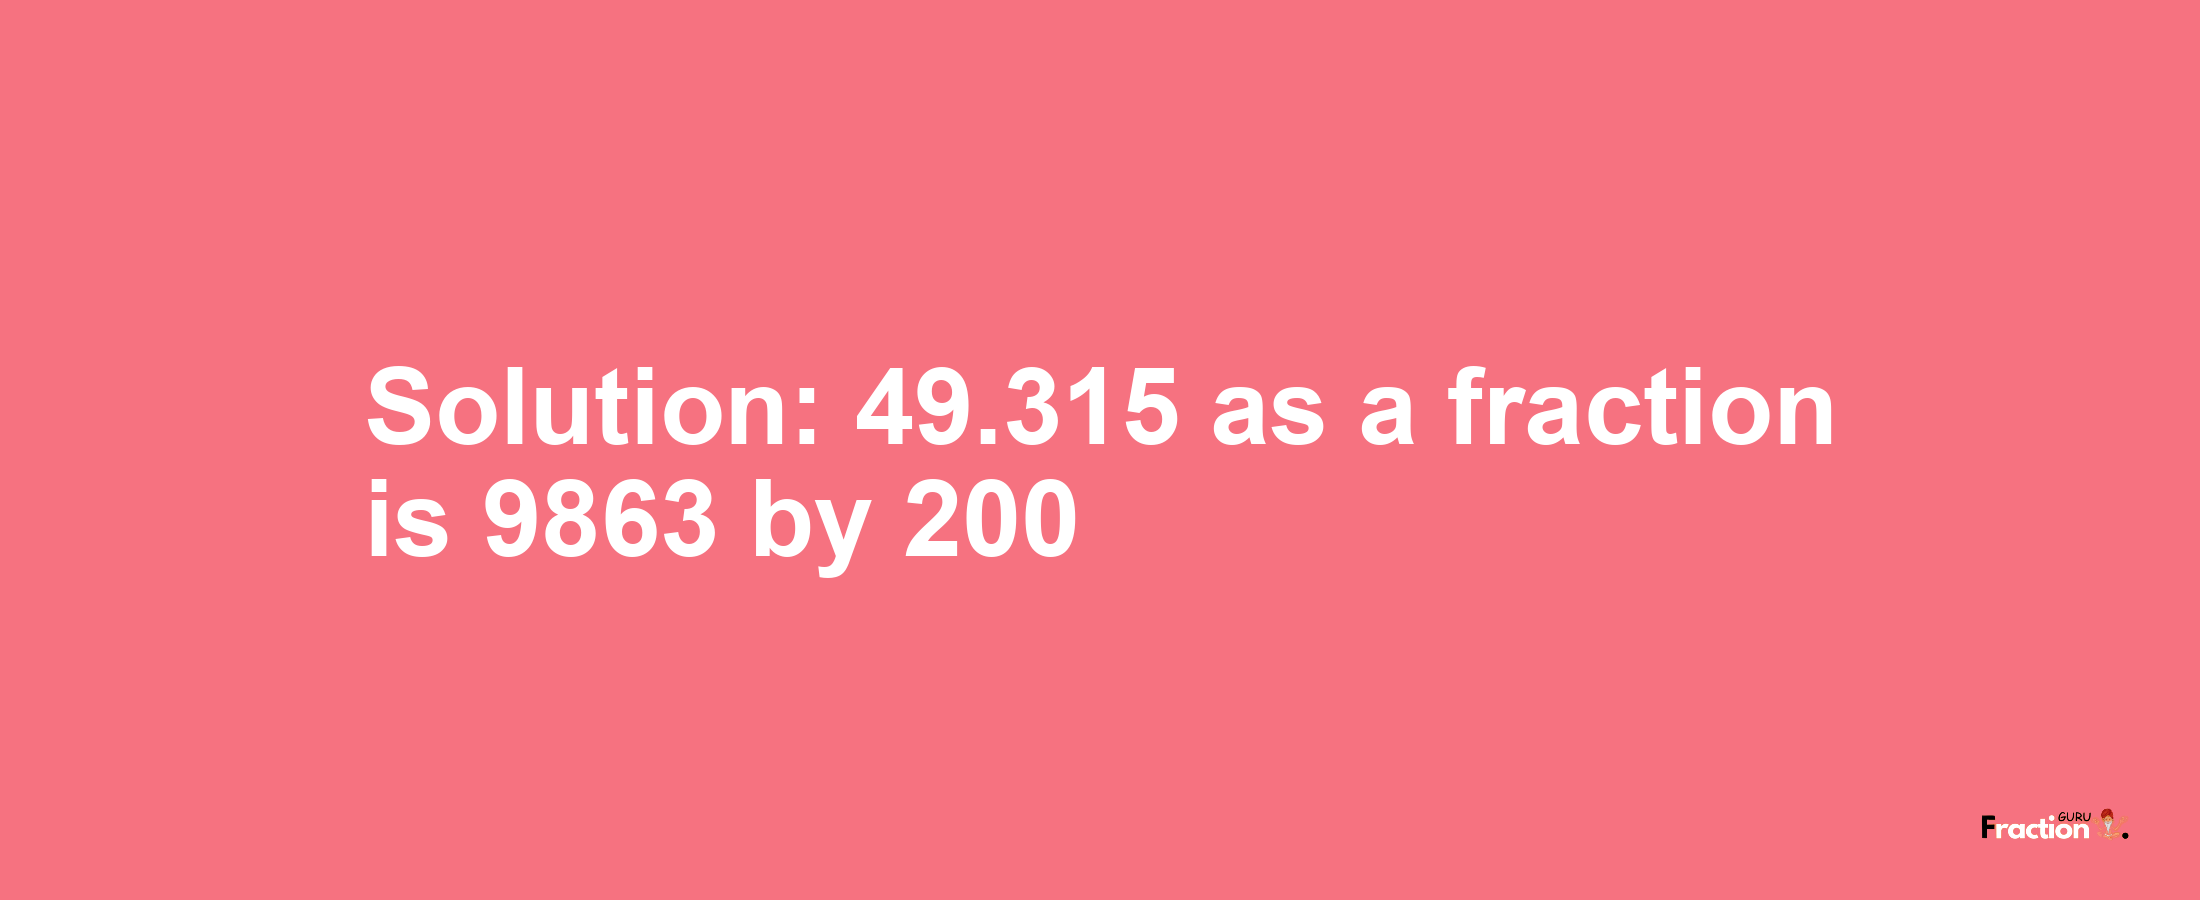 Solution:49.315 as a fraction is 9863/200